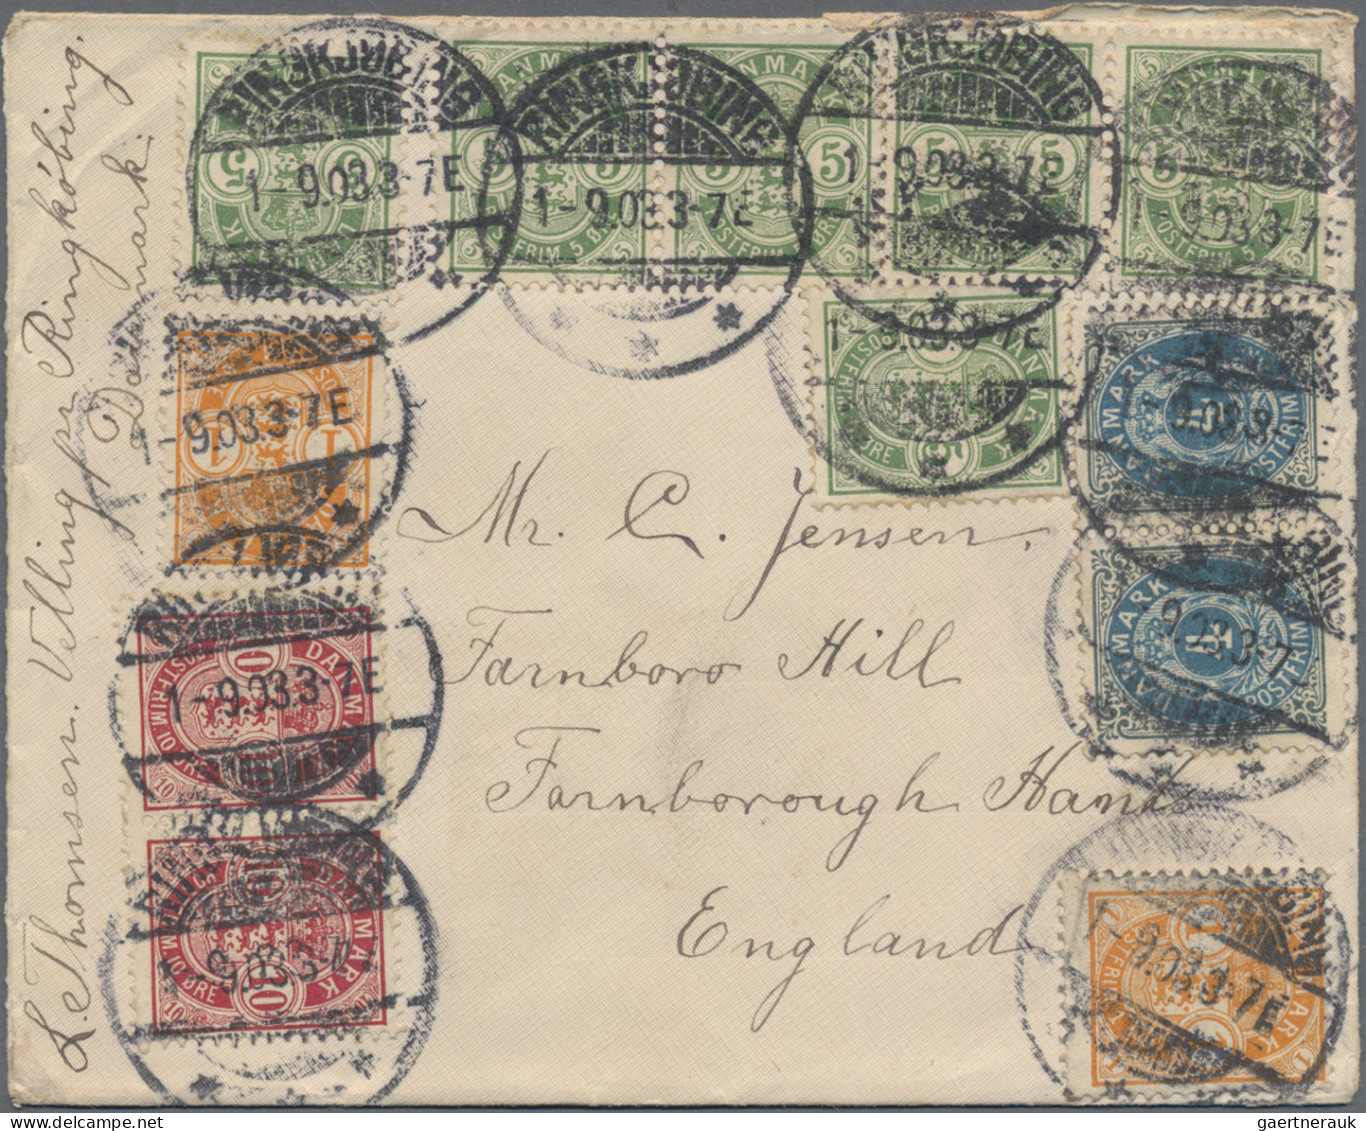 Denmark: 1857/1982, assortment of apprx. 96 covers/cards, showing a nice range o